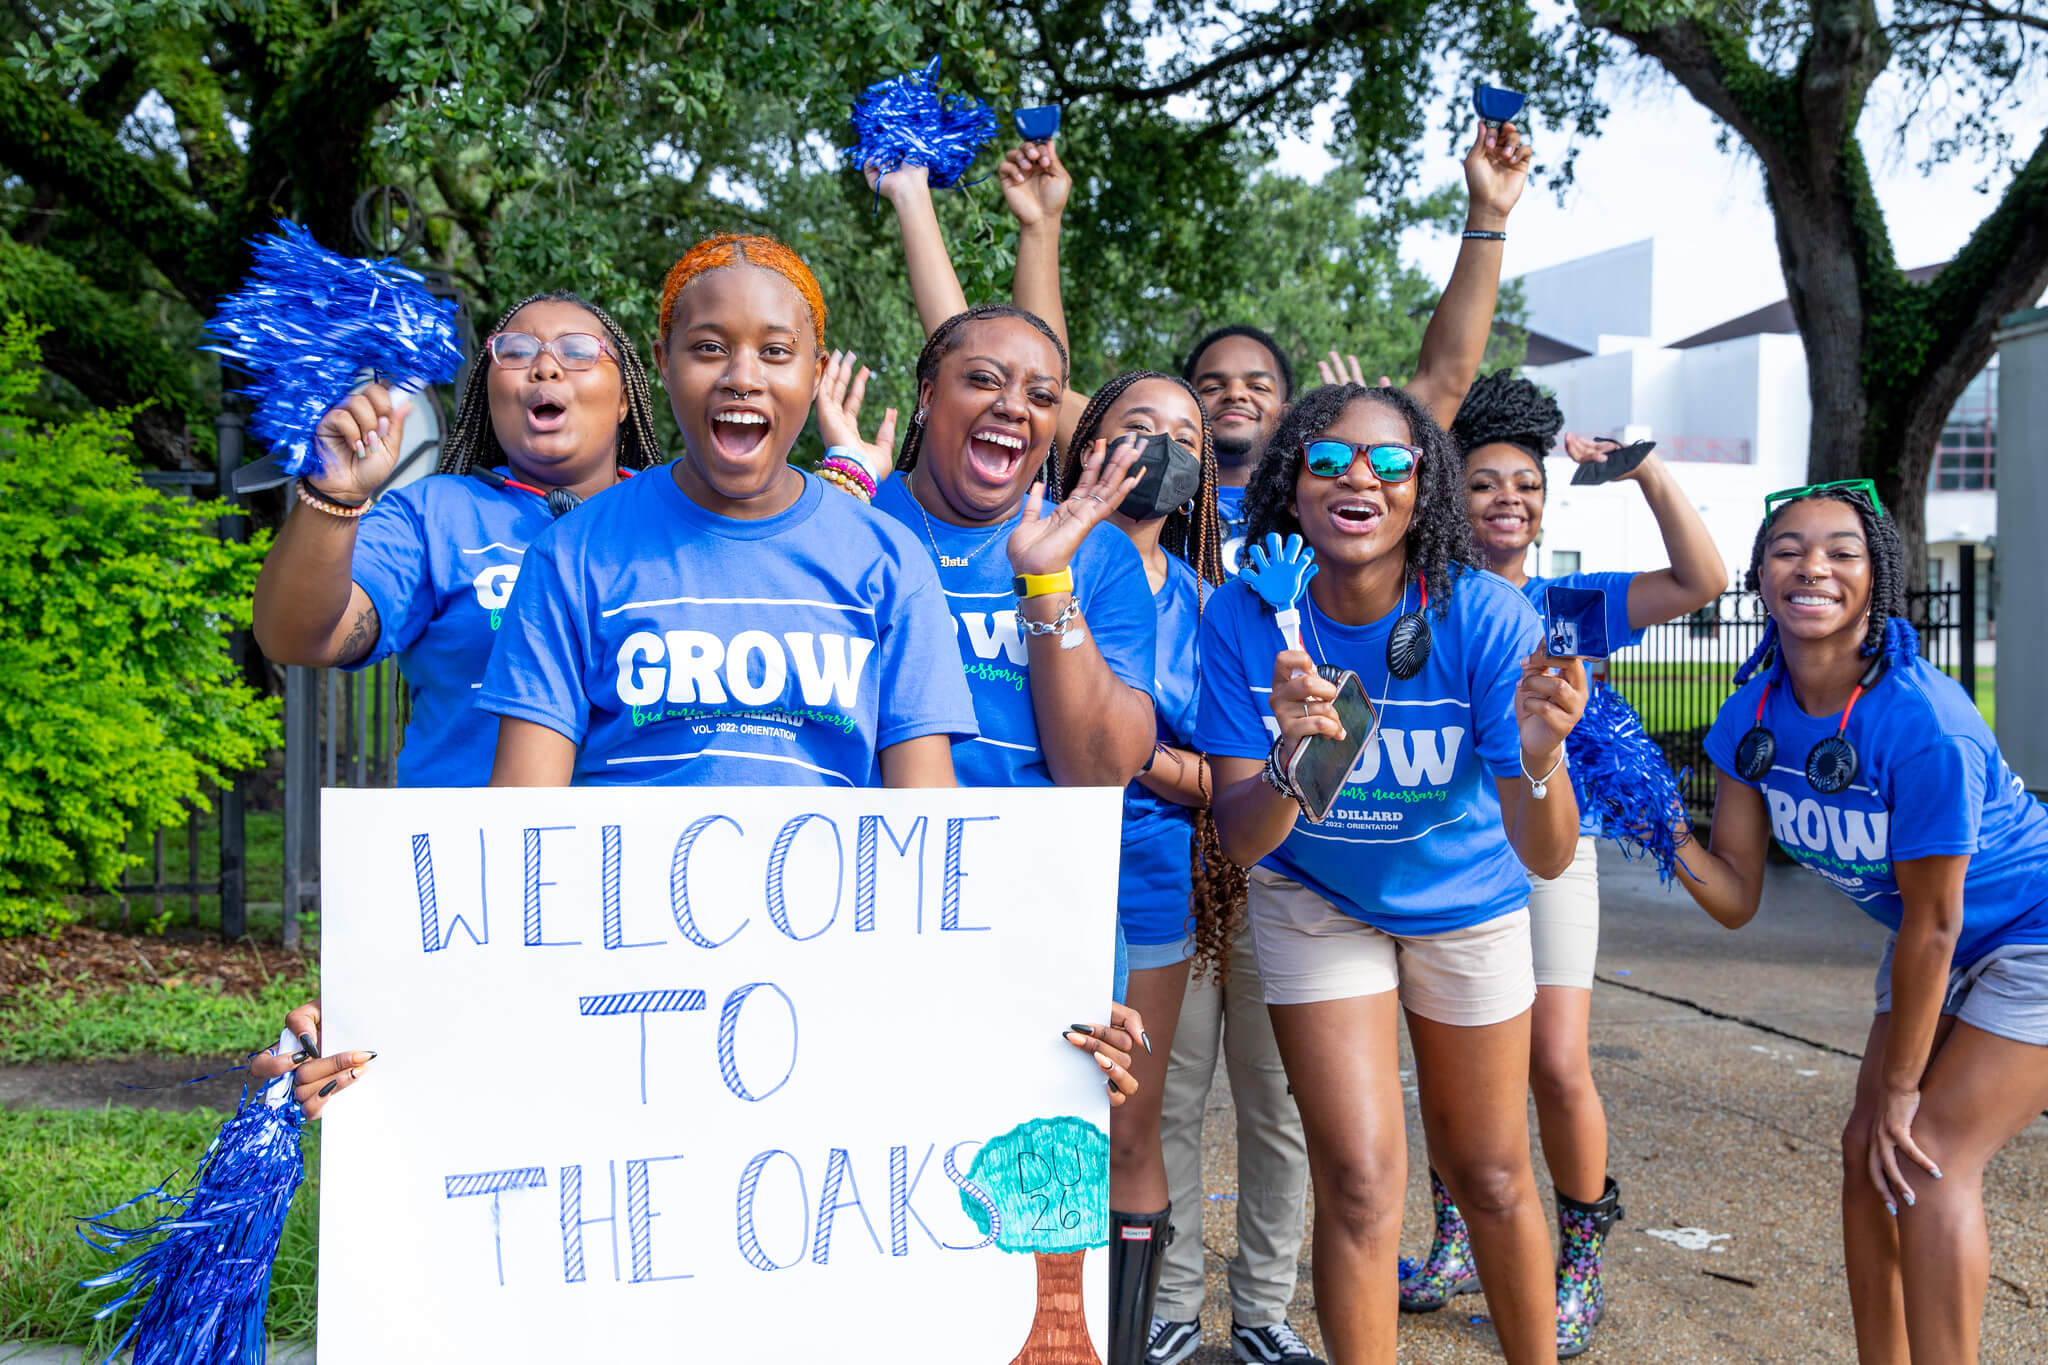 DU students with welcome to campus sign